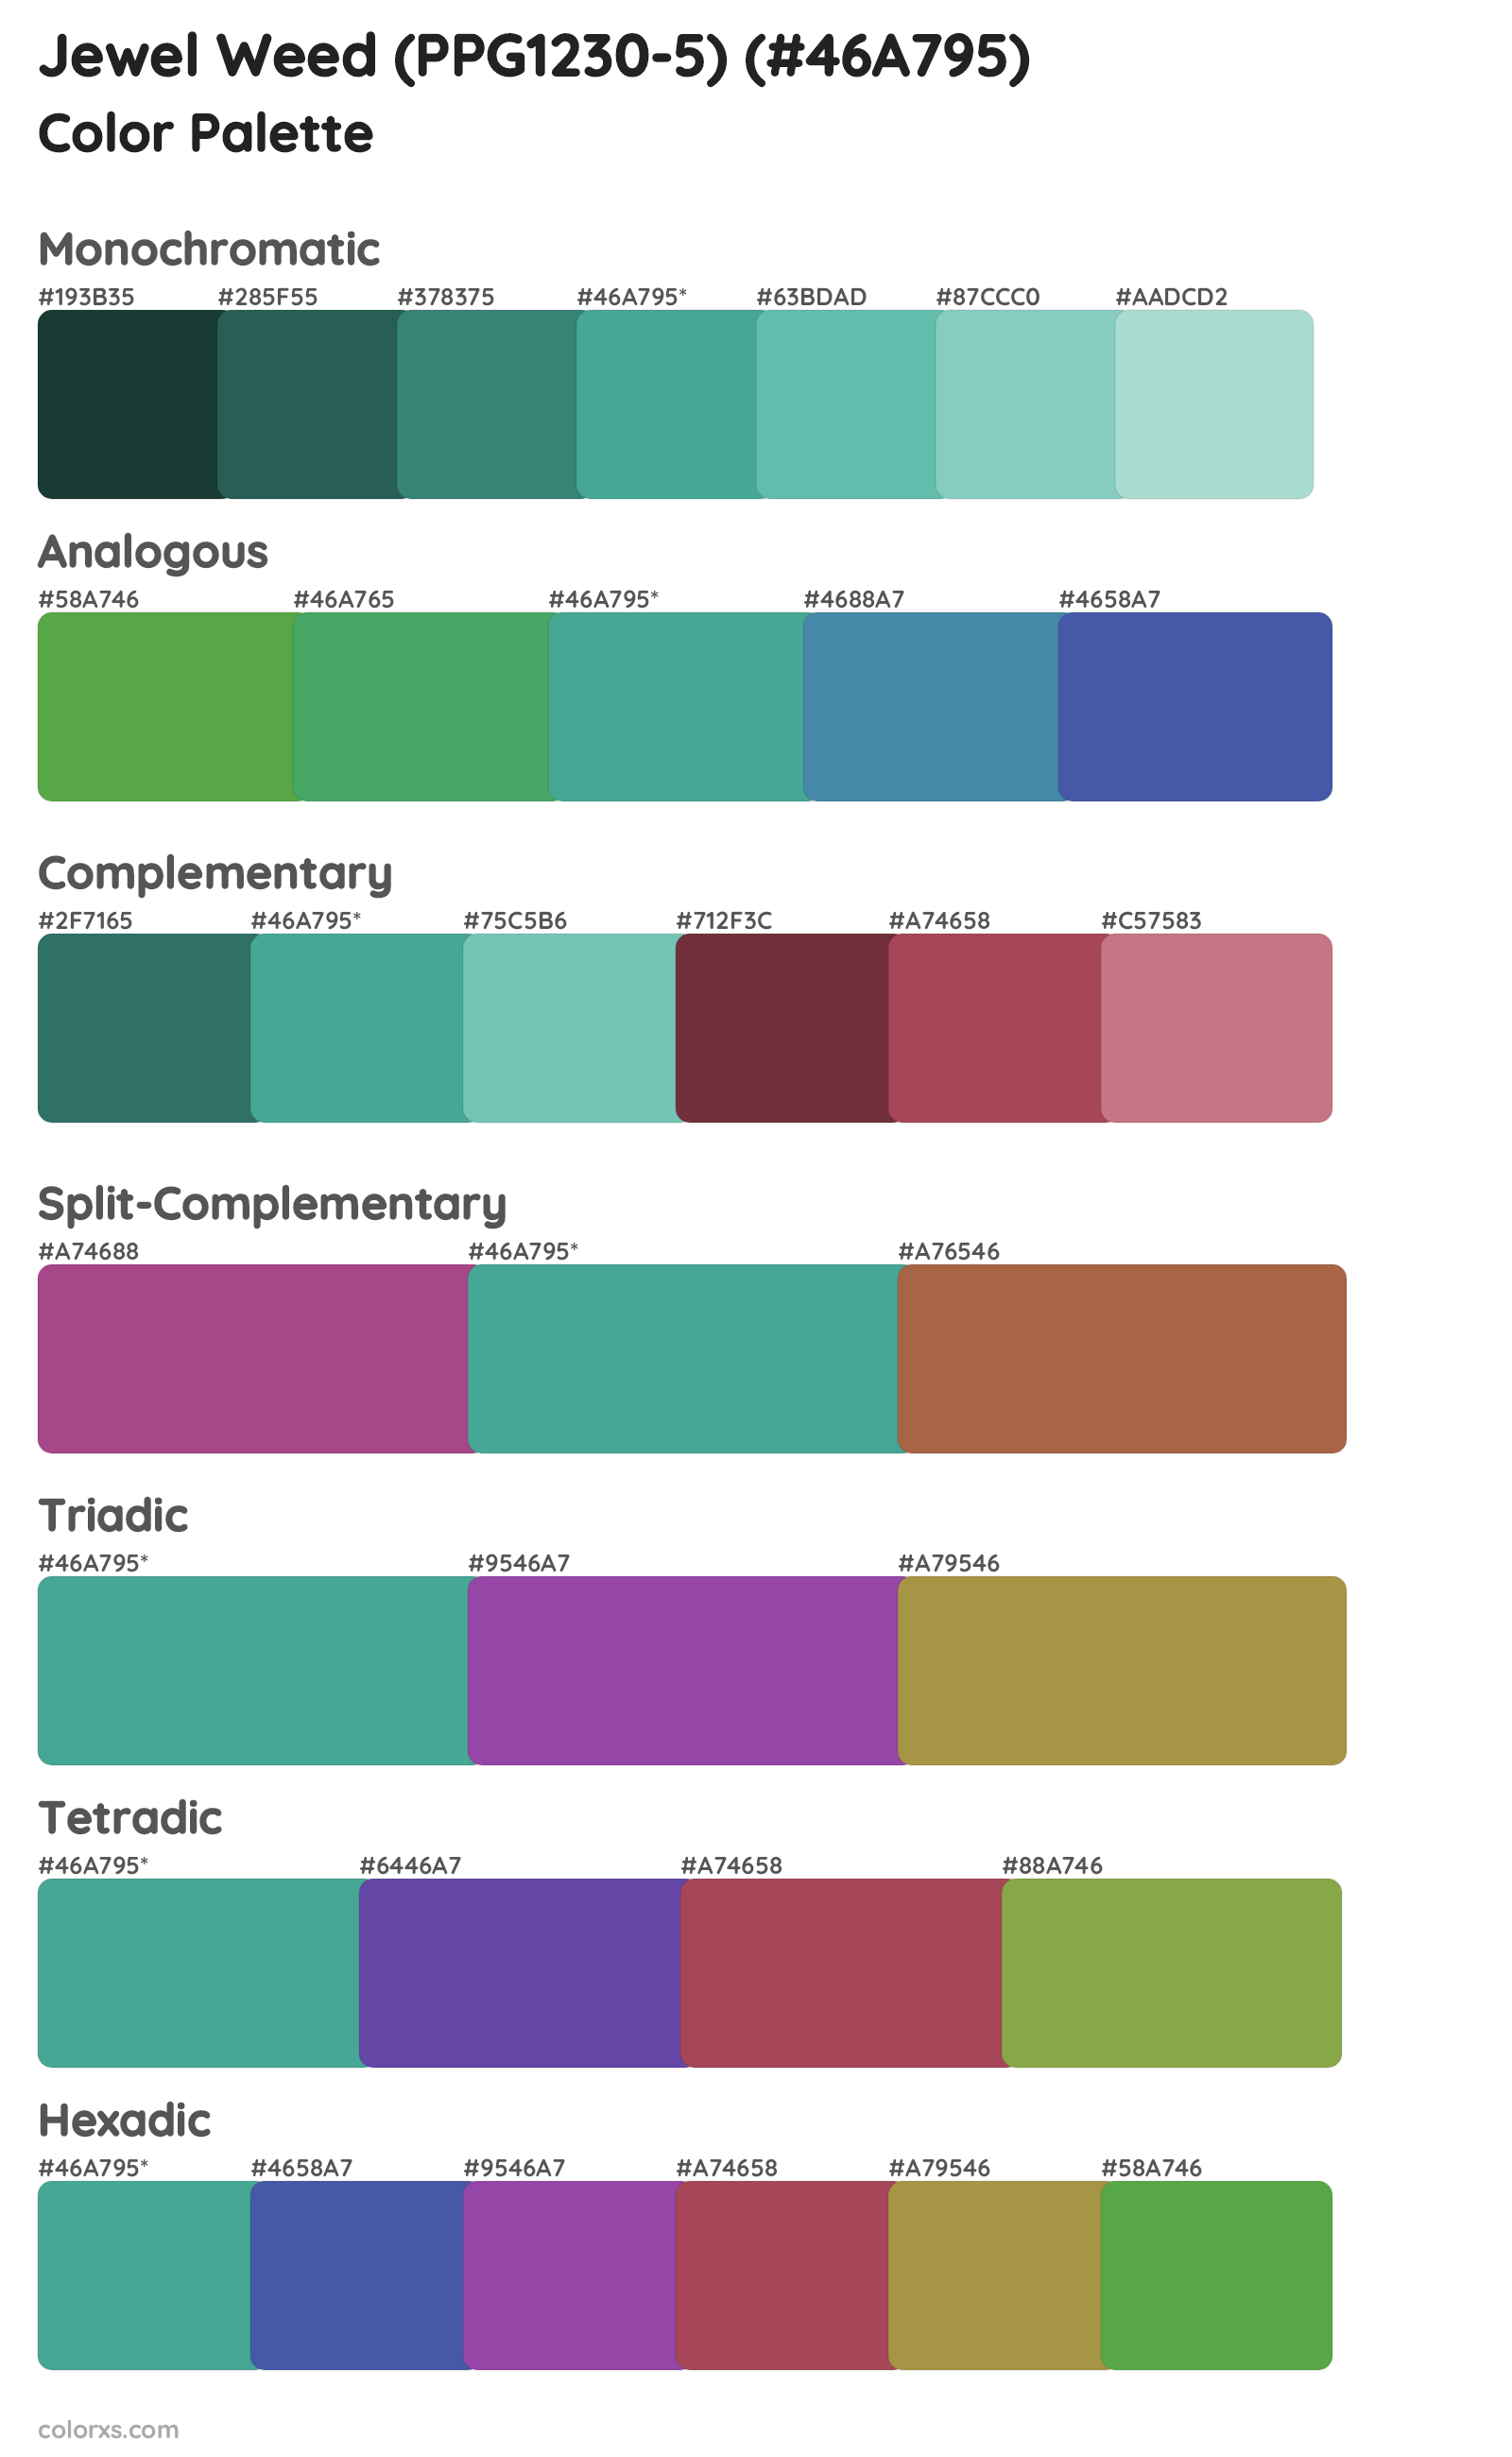 Jewel Weed (PPG1230-5) Color Scheme Palettes